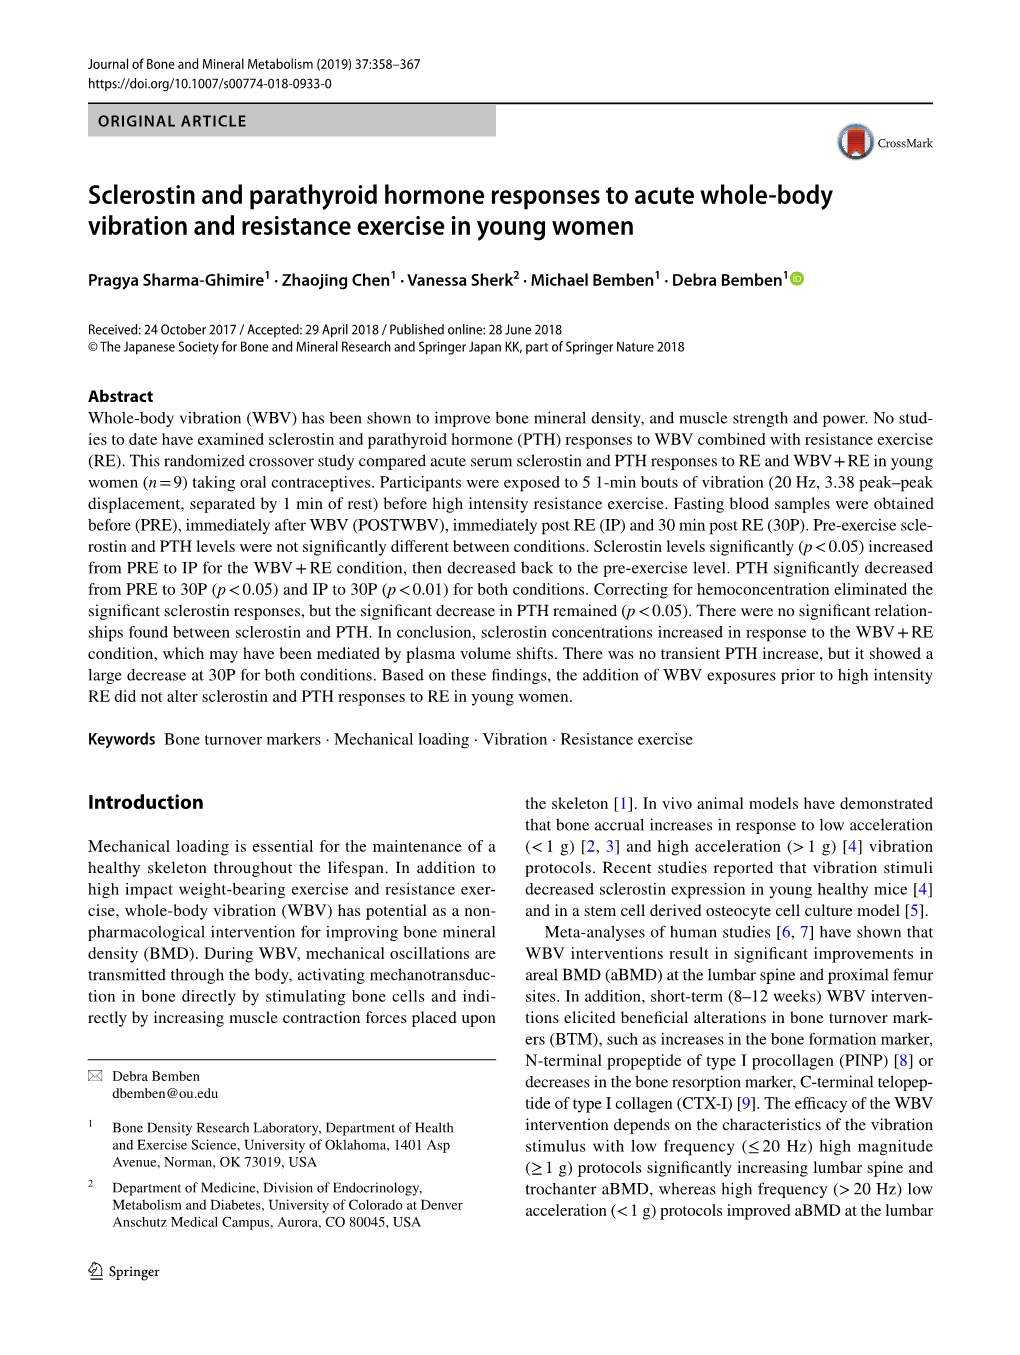 Sclerostin and Parathyroid Hormone Responses to Acute Whole-Body